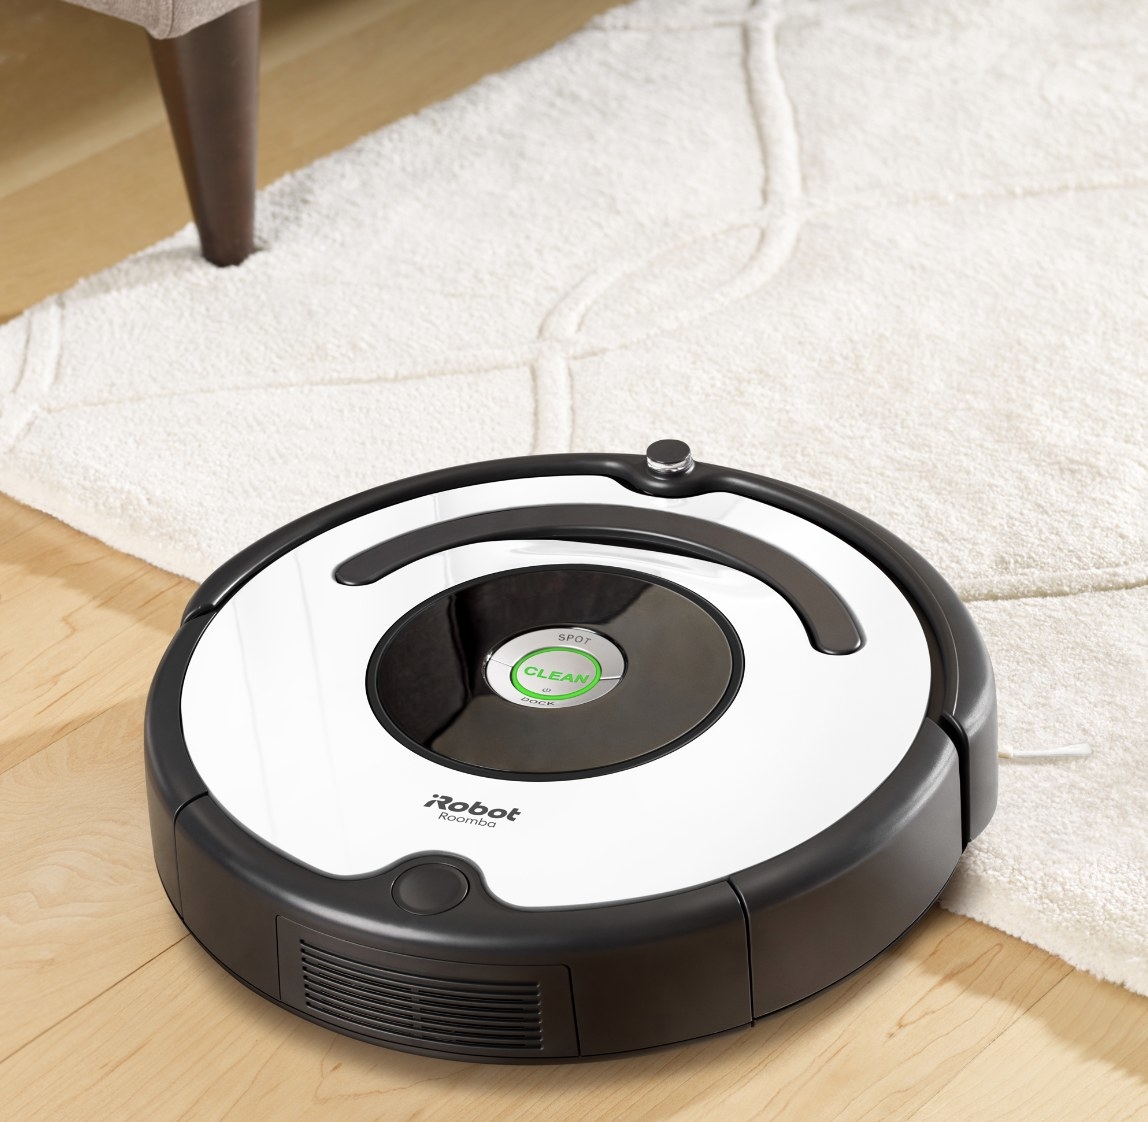 the iRobot roomba in black and white